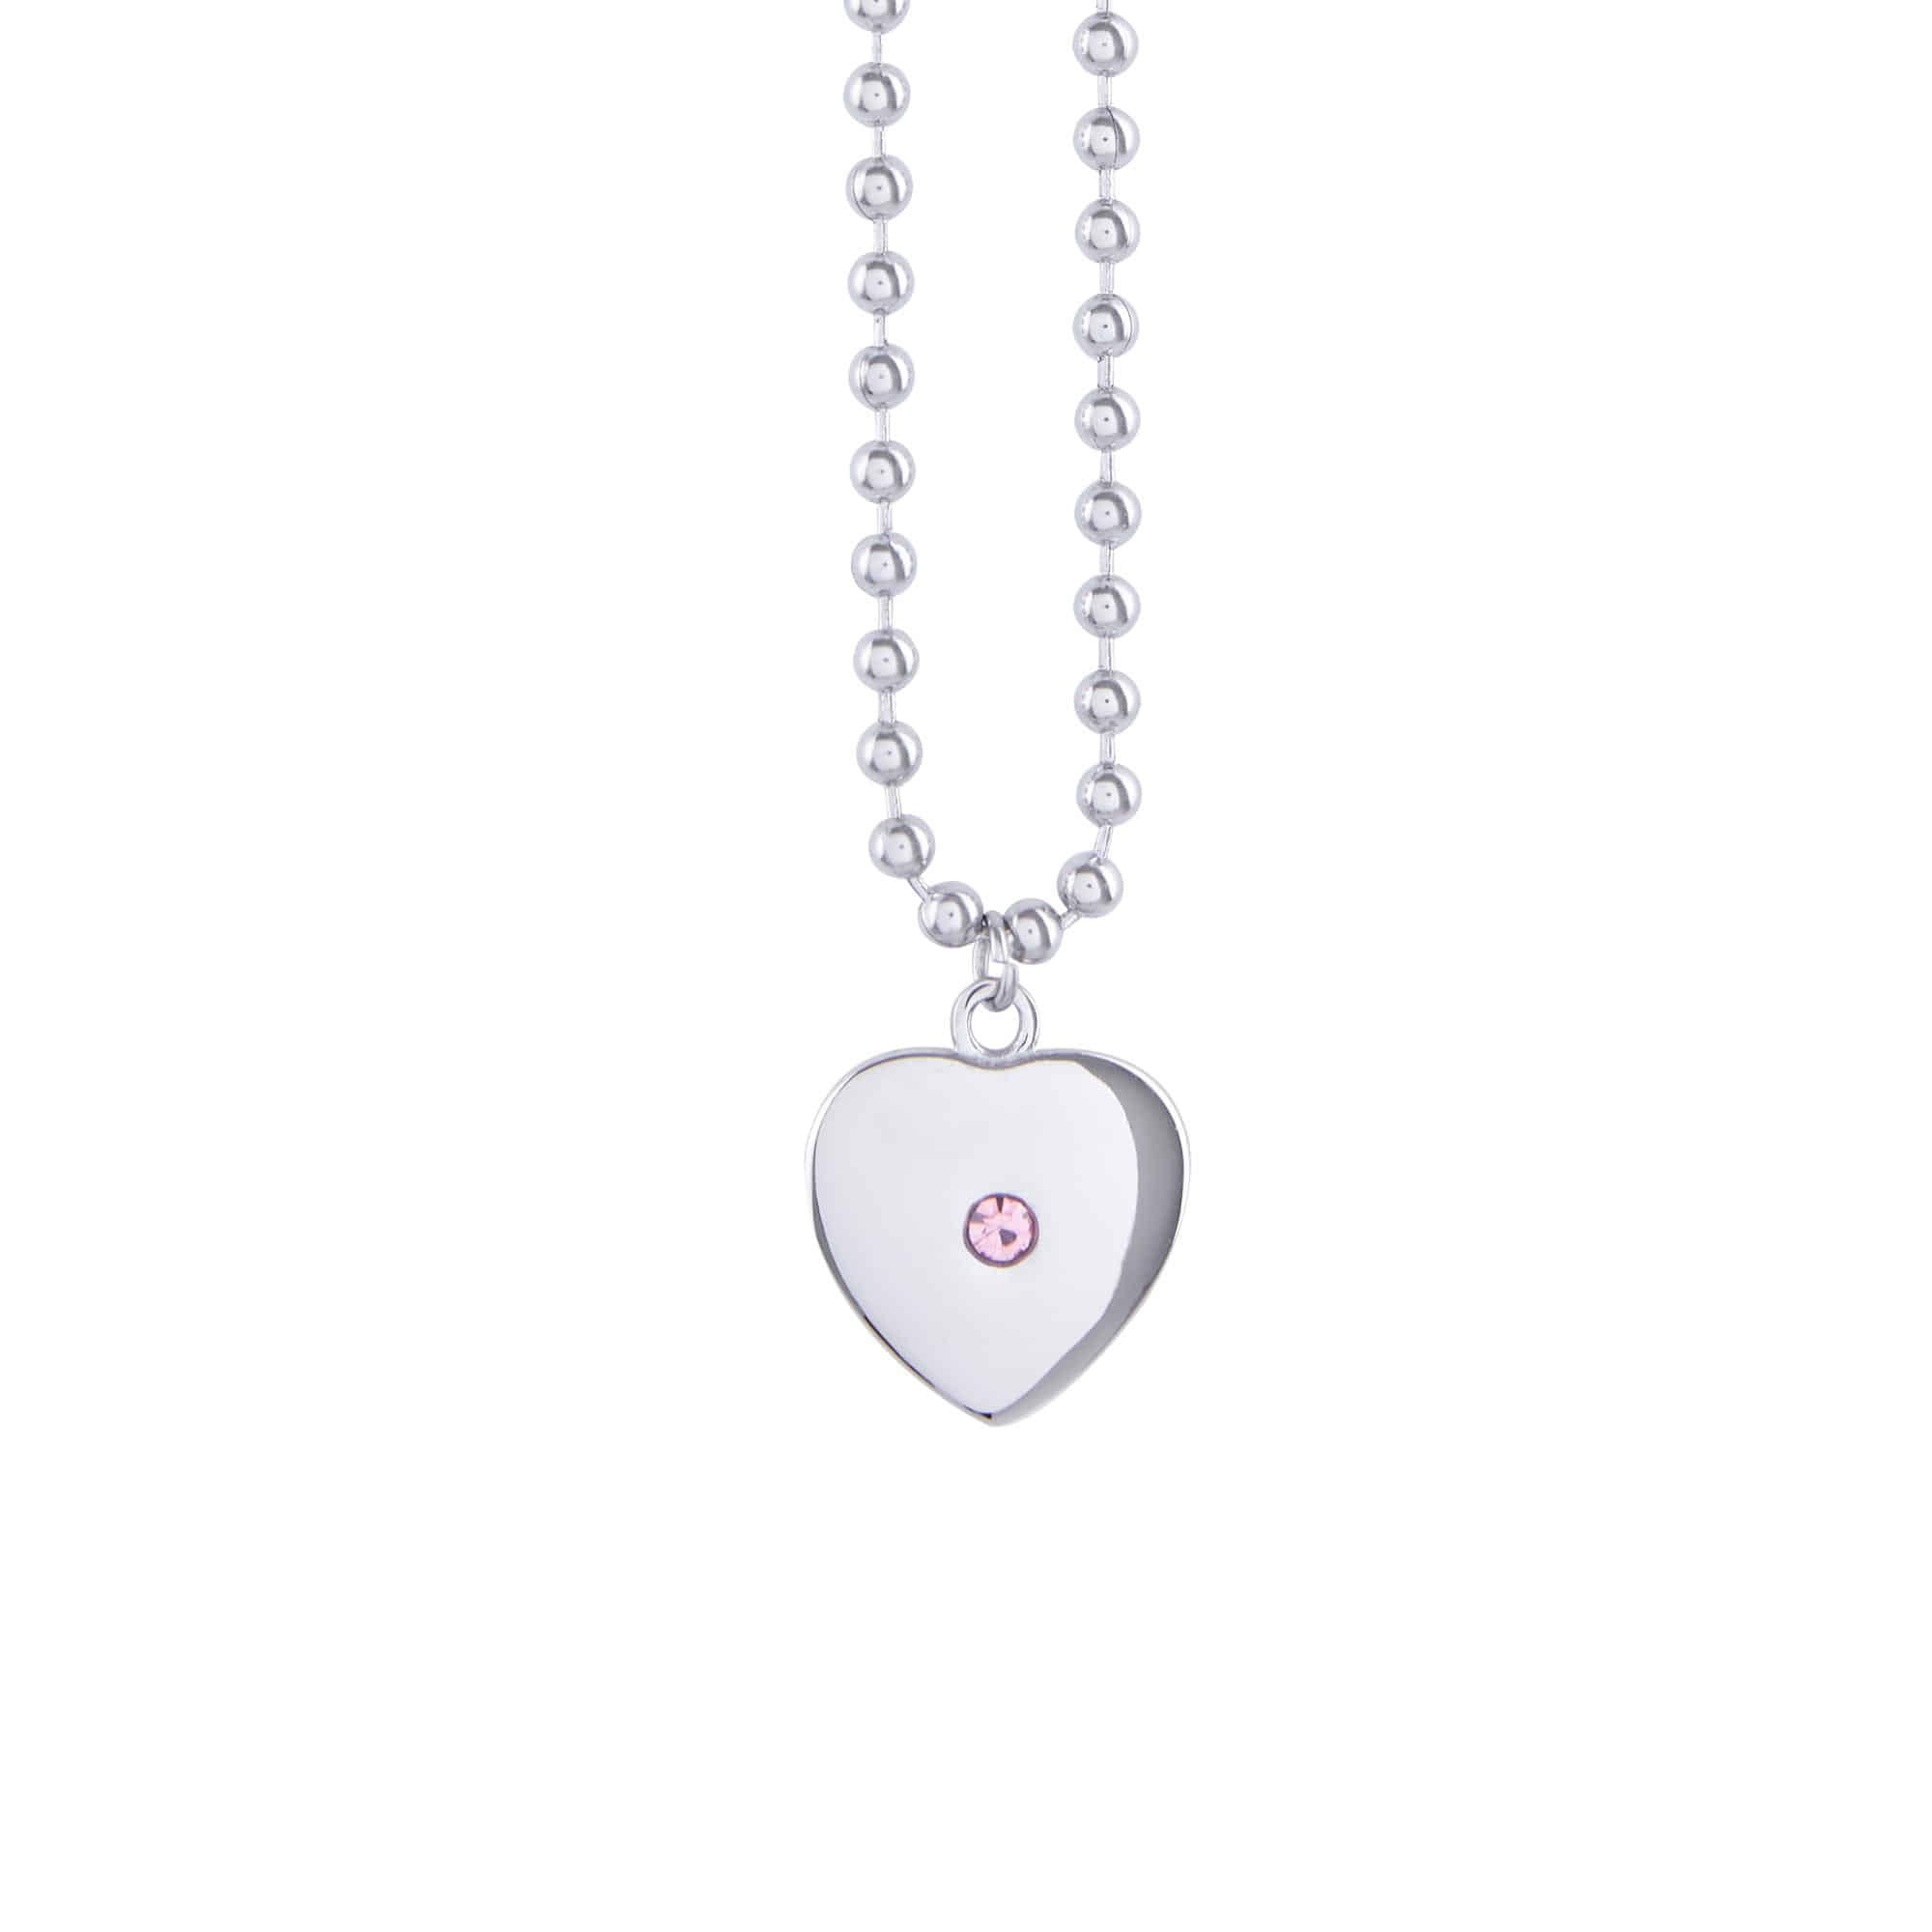 HEART STONE NECKLACE